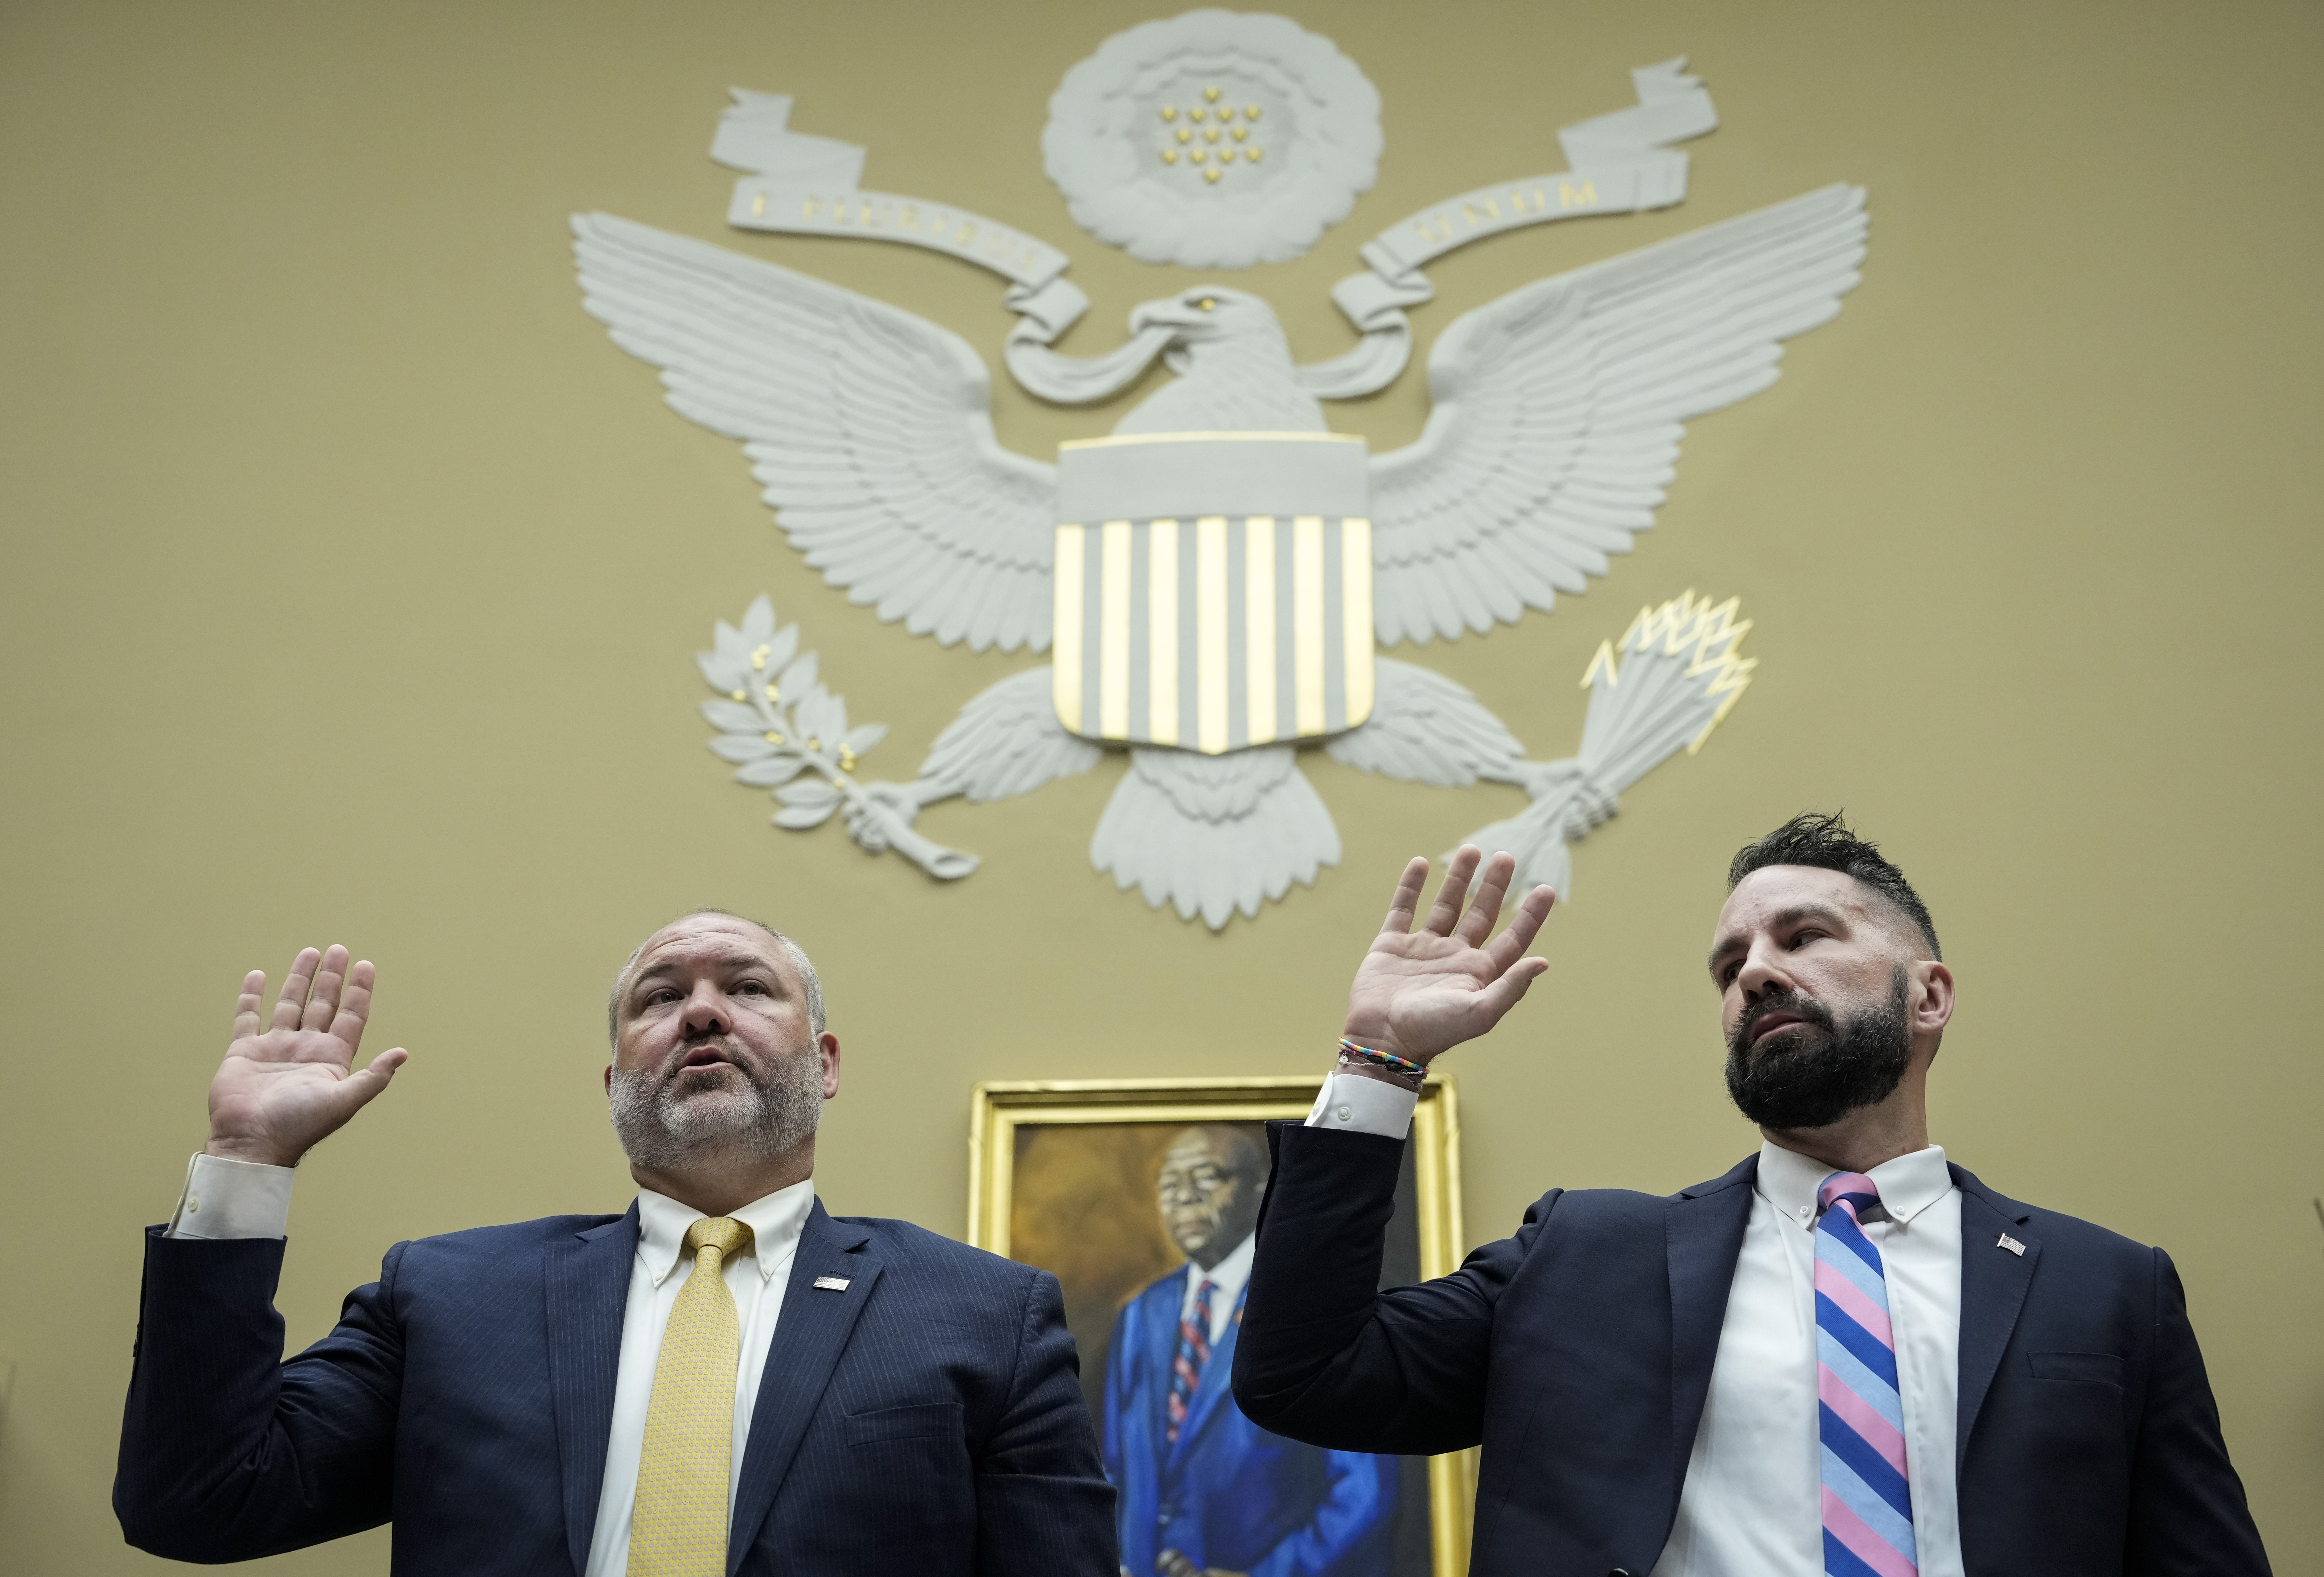 WASHINGTON, DC - JULY 19: (L-R) Supervisory IRS Special Agent Gary Shapley and IRS Criminal Investigator Joseph Ziegler are sworn-in during a House Oversight Committee hearing related to the Justice Department's investigation of Hunter Biden, on Capitol Hill July 19, 2023 in Washington, DC. (Photo by Drew Angerer/Getty Images)